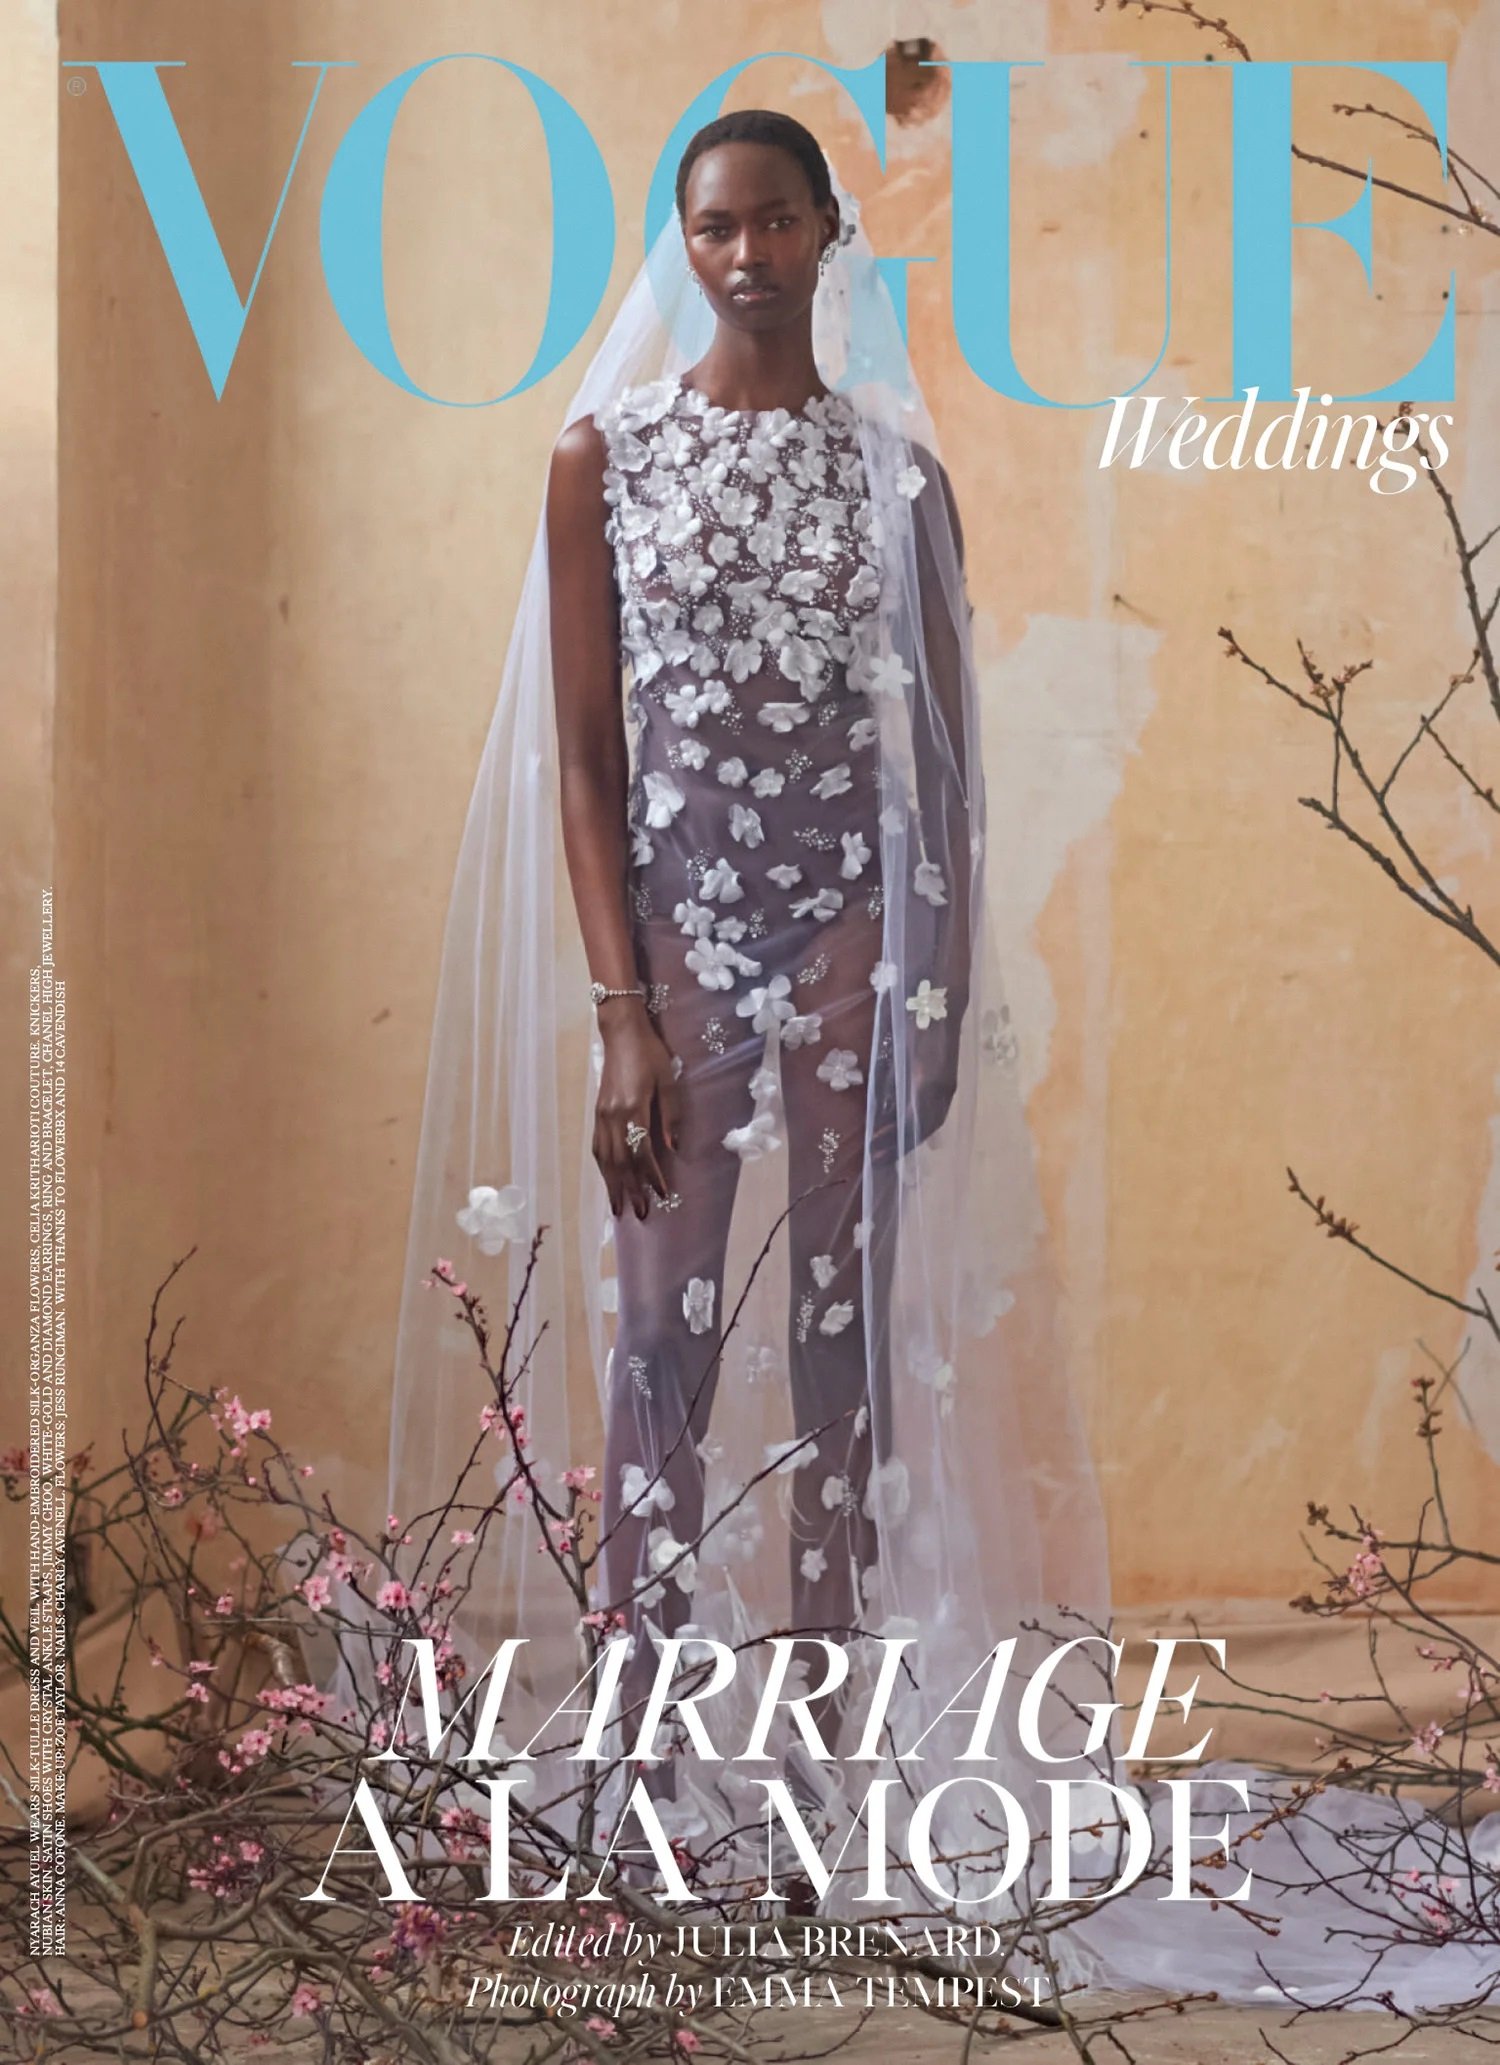 Nyarach-Abouch-Ayuel-covers-British-Vogue-Weddings-May-2022-by-Emma-Tempest-1.jpg